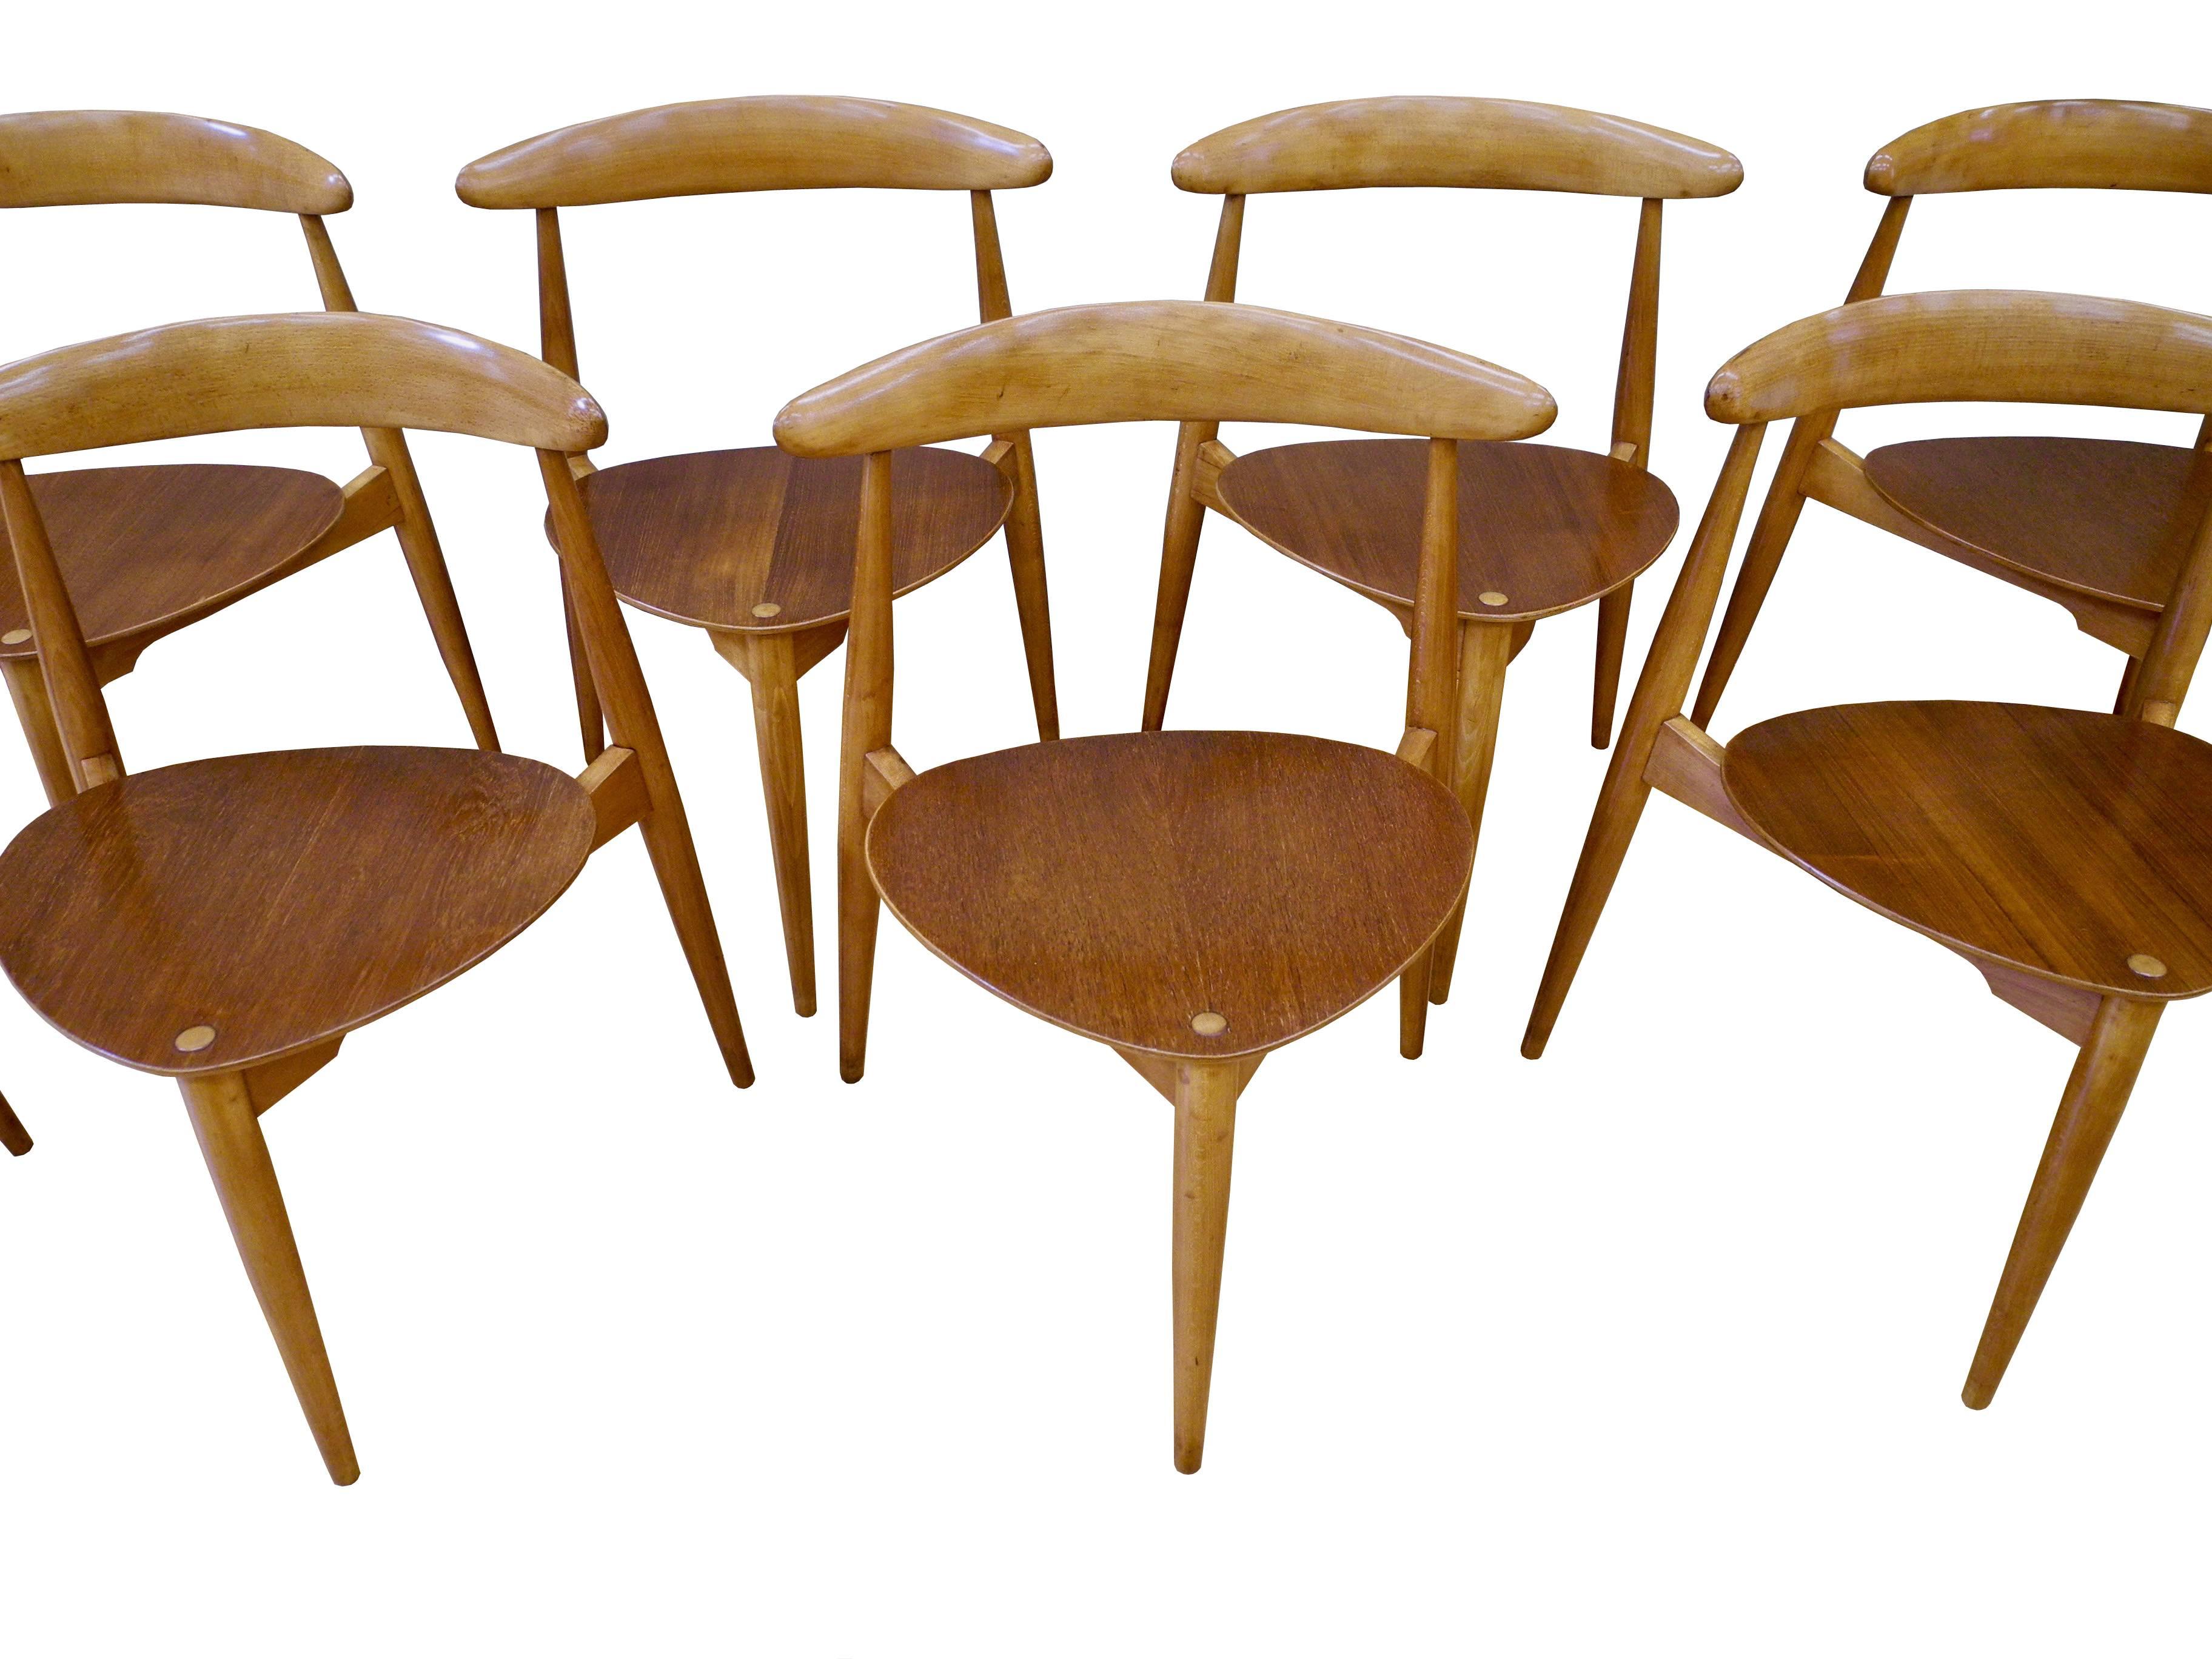 This set of eight Danish modern stacking dining chairs are made of teak and beech. The 